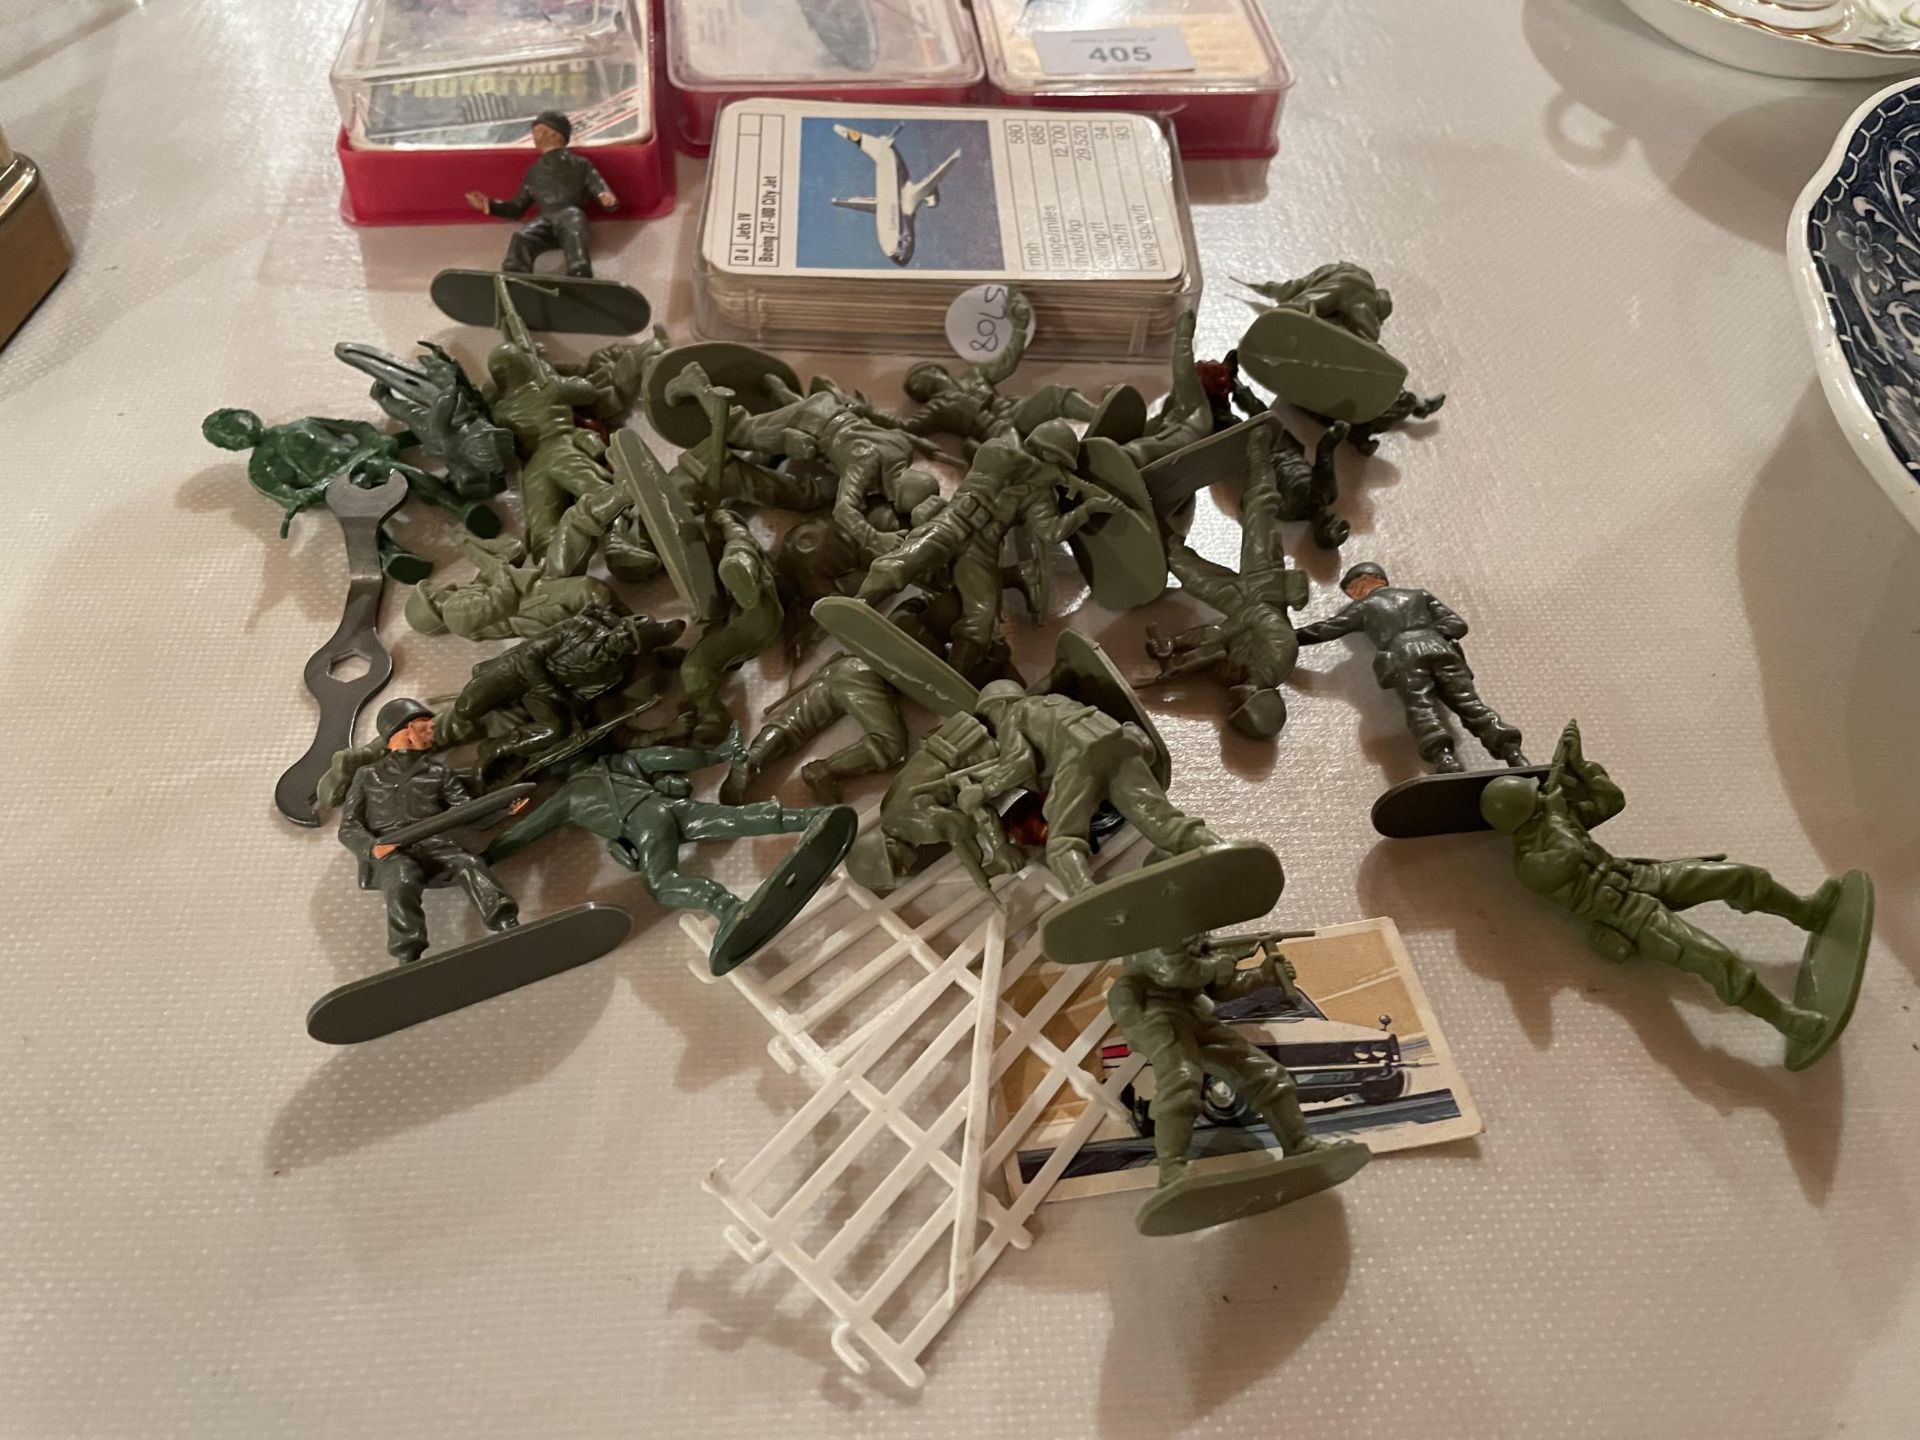 AN AMOUNT OF PLASTIC SOLDIERS, AND SIX TOP TRUMP CARD GAMES TO INCLUDE CARS AND PLANES - Image 2 of 3